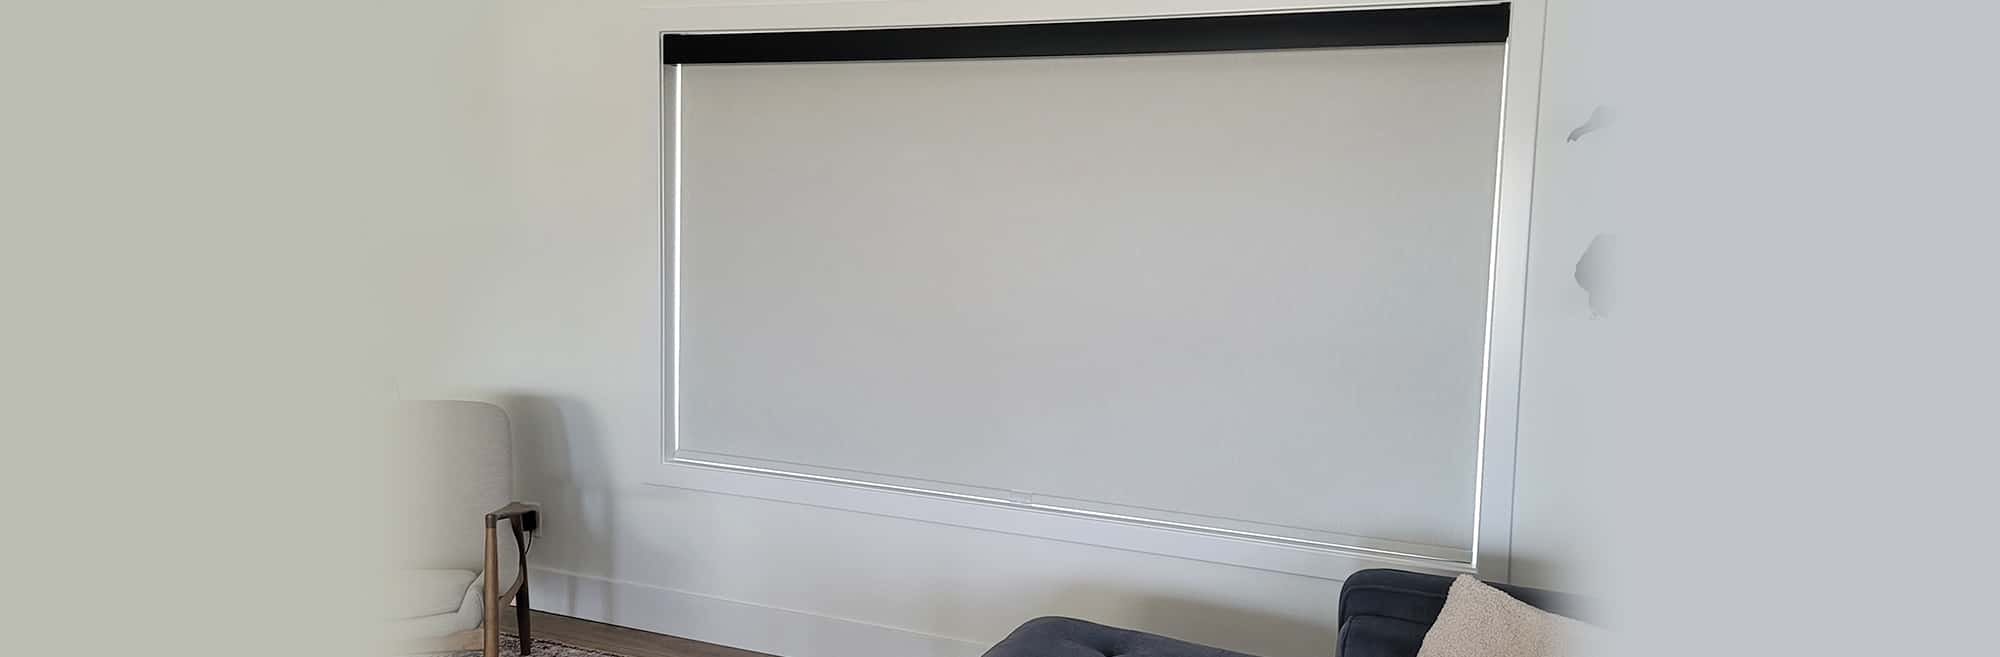 roller-shades-graber-pic-5